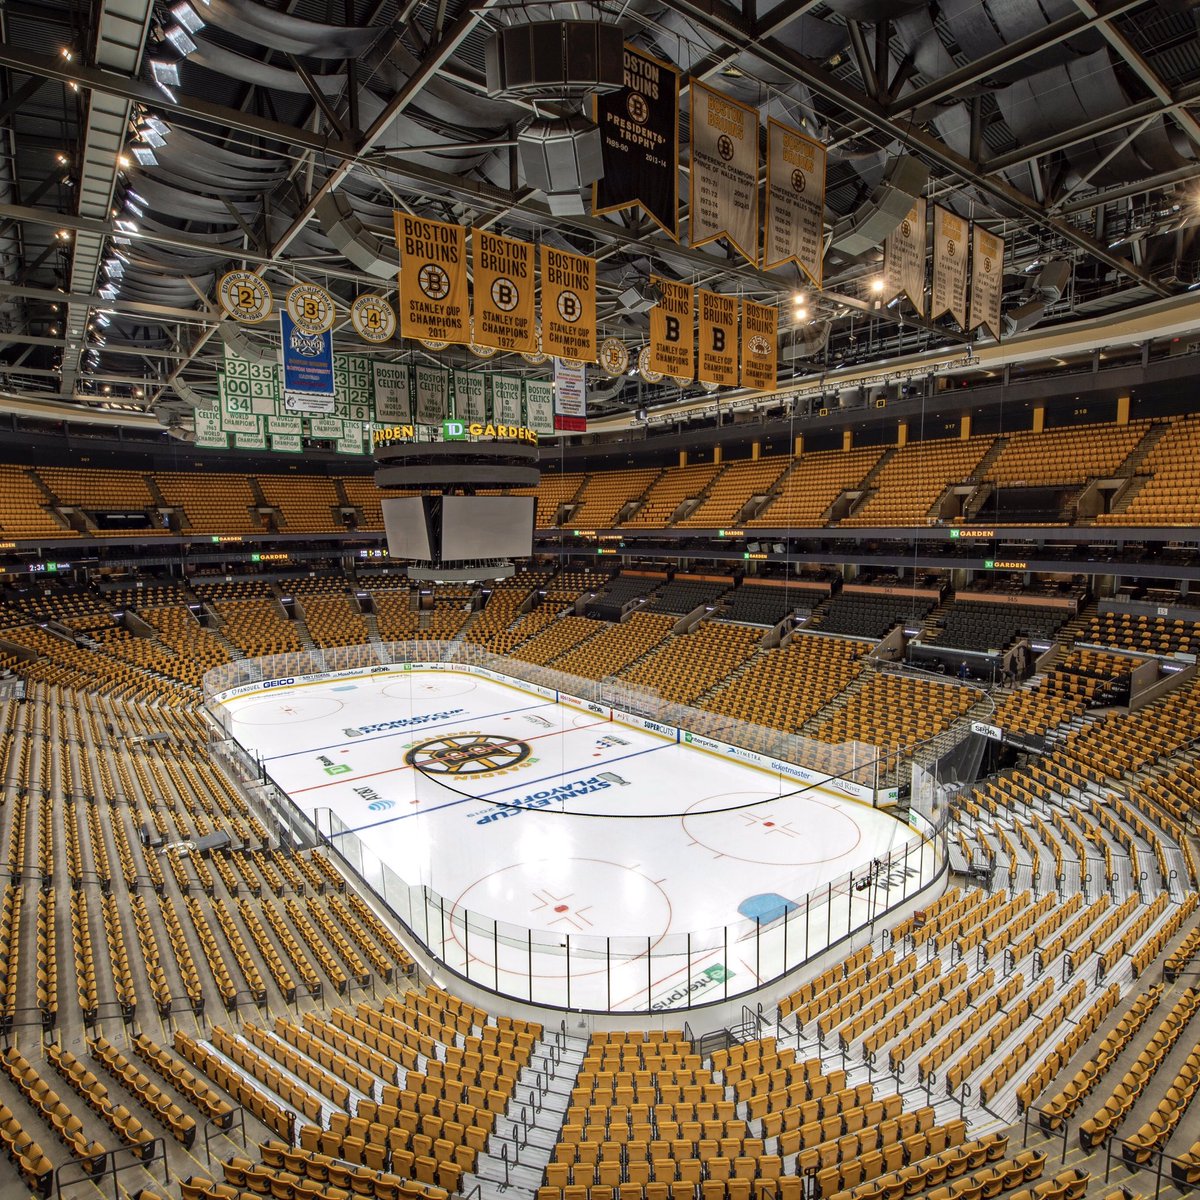 Td Garden On Twitter New Look Who Dis Nearly Three Months